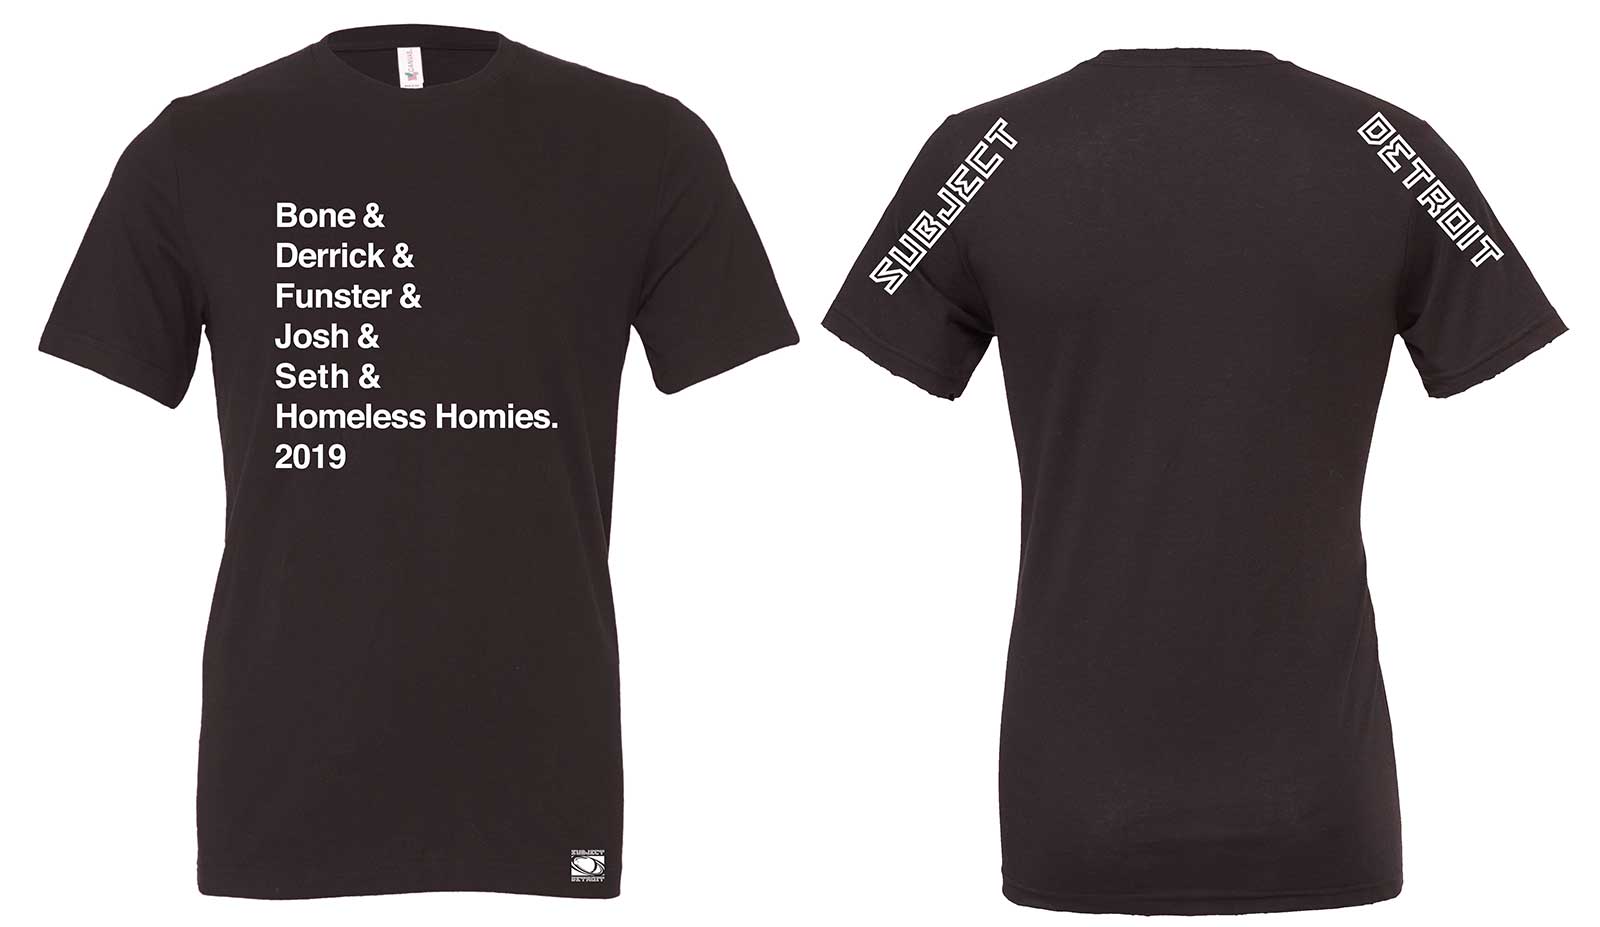 Limited edition homeless homies benefit shirt